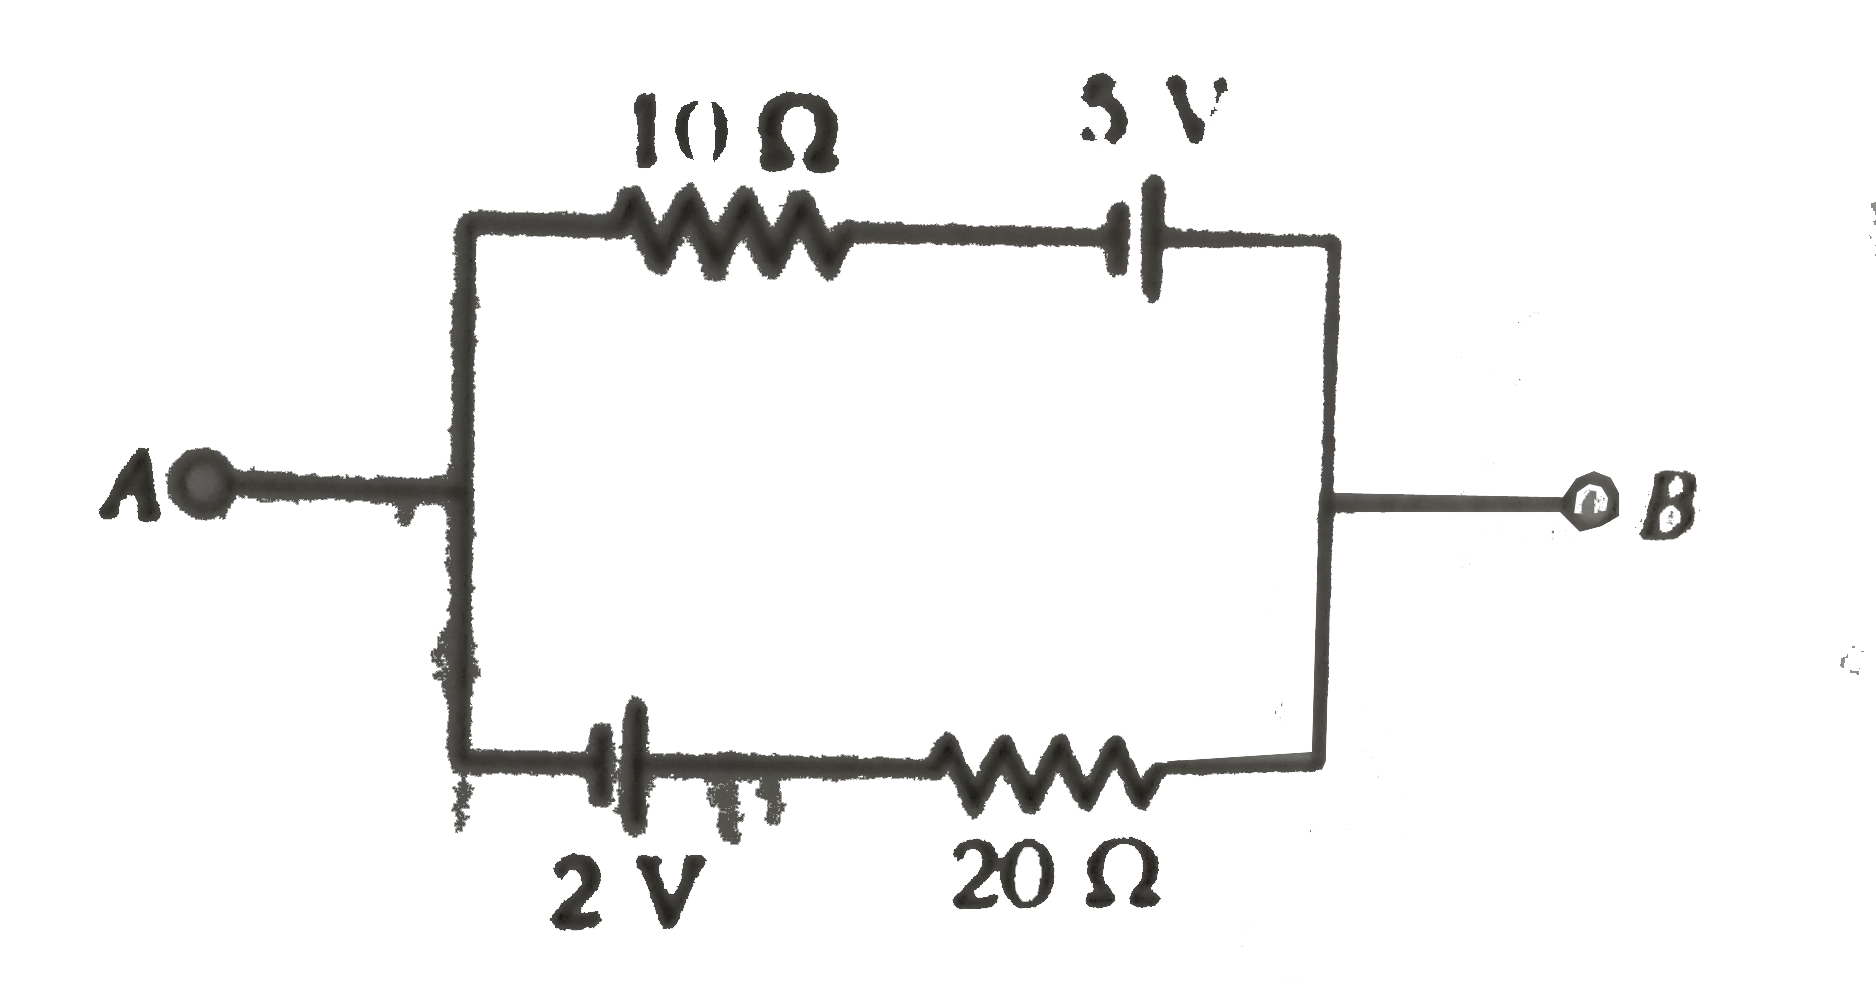 The current in the given circuit is